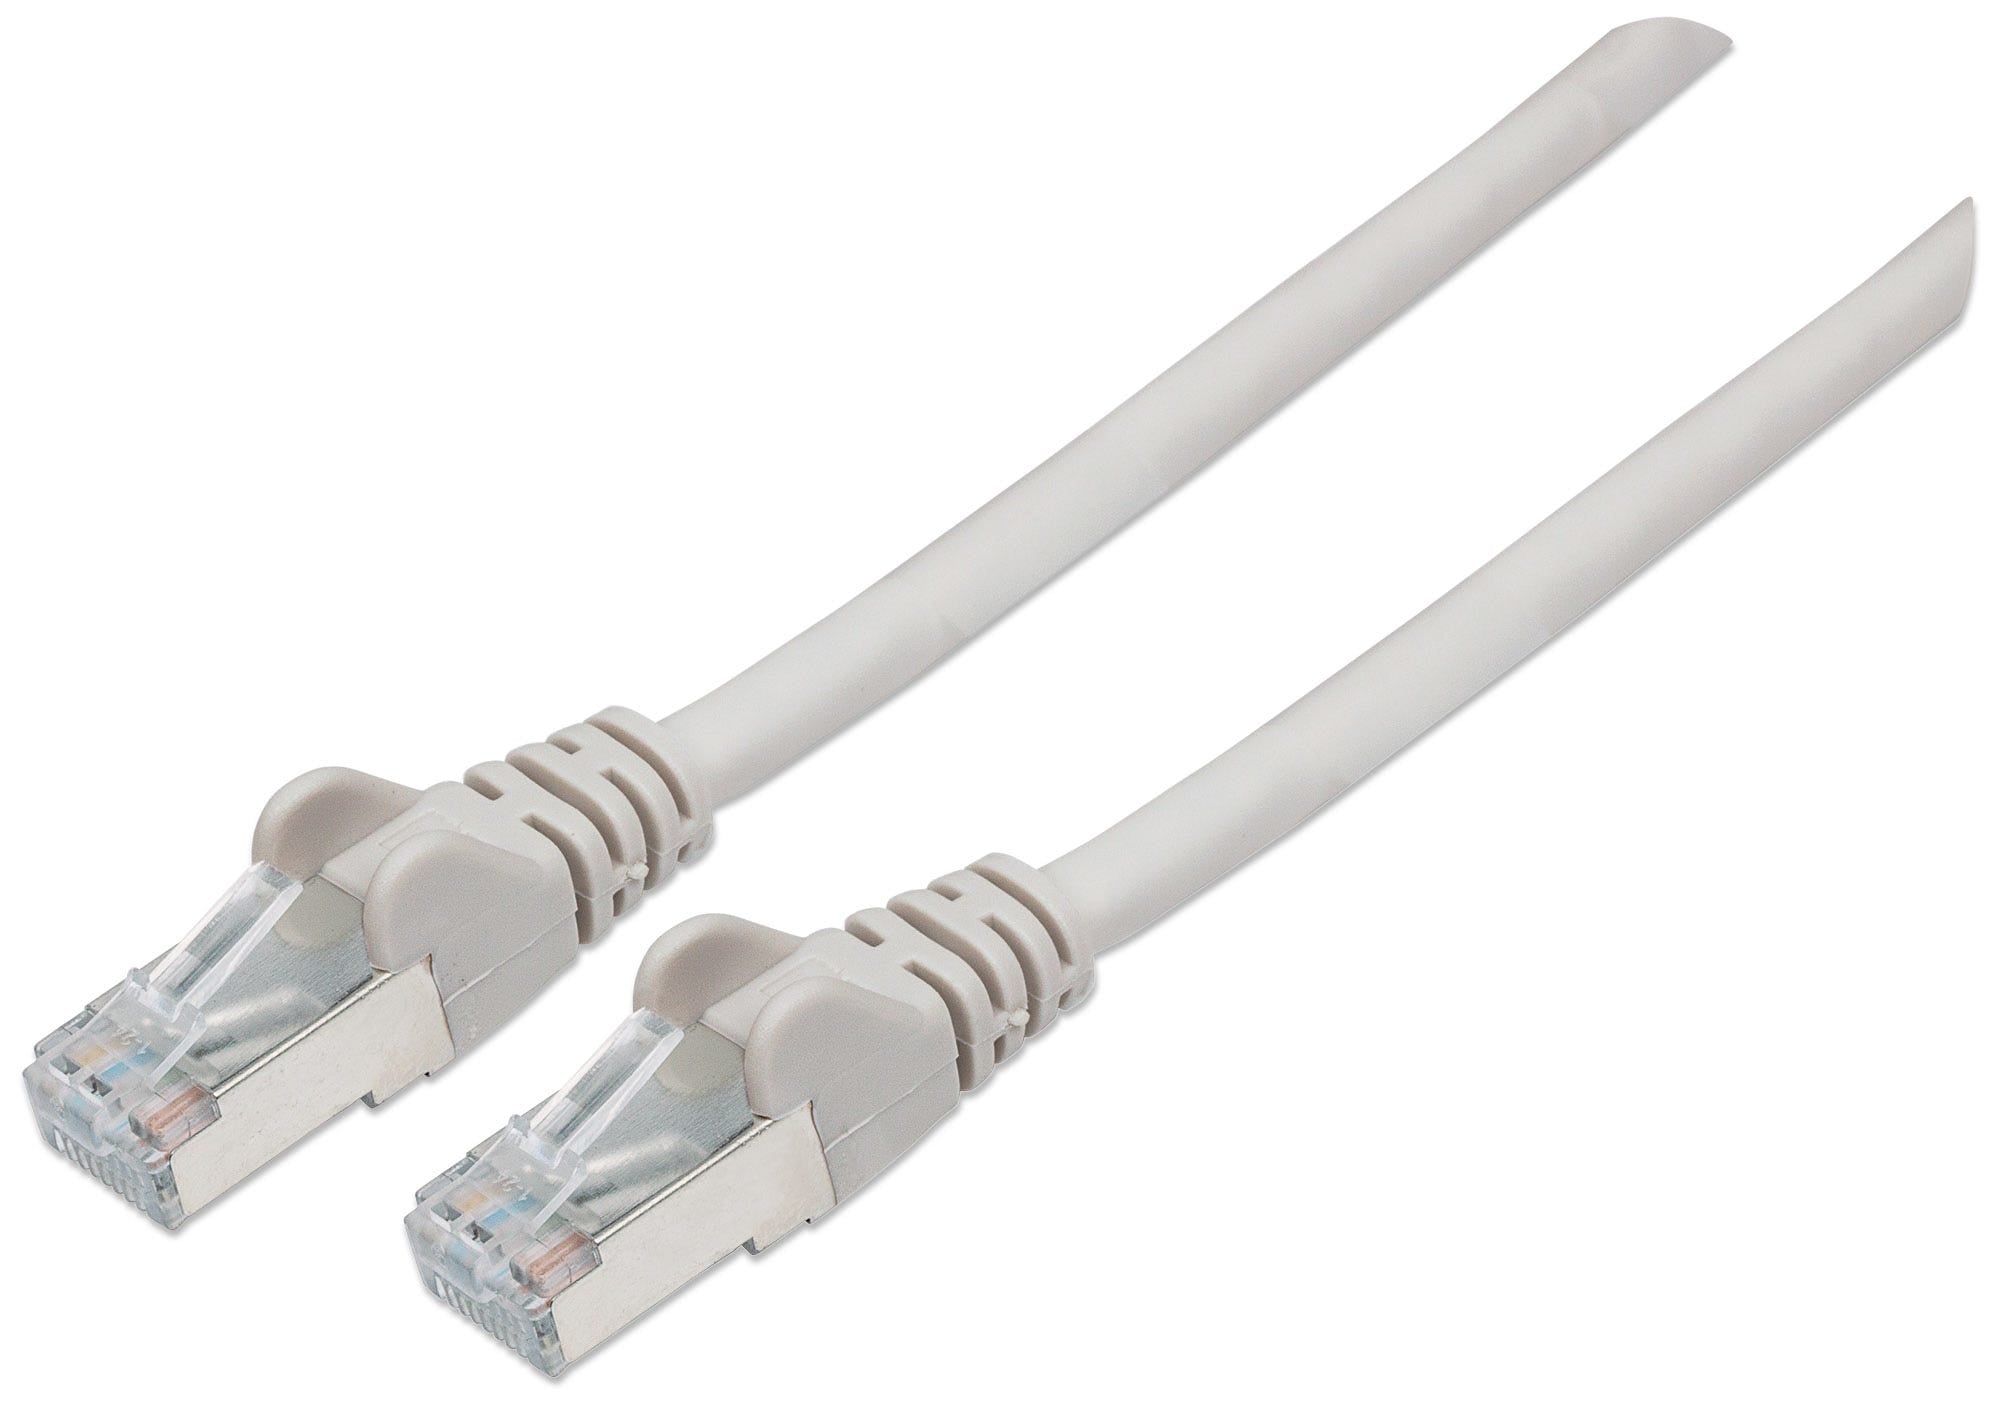 Intellinet Network Patch Cable, Cat6A, 10m, Grey, Copper, S/FTP, LSOH / LSZH, PVC, RJ45, Gold Plated Contacts, Snagless, Booted, Lifetime Warranty, Polybag